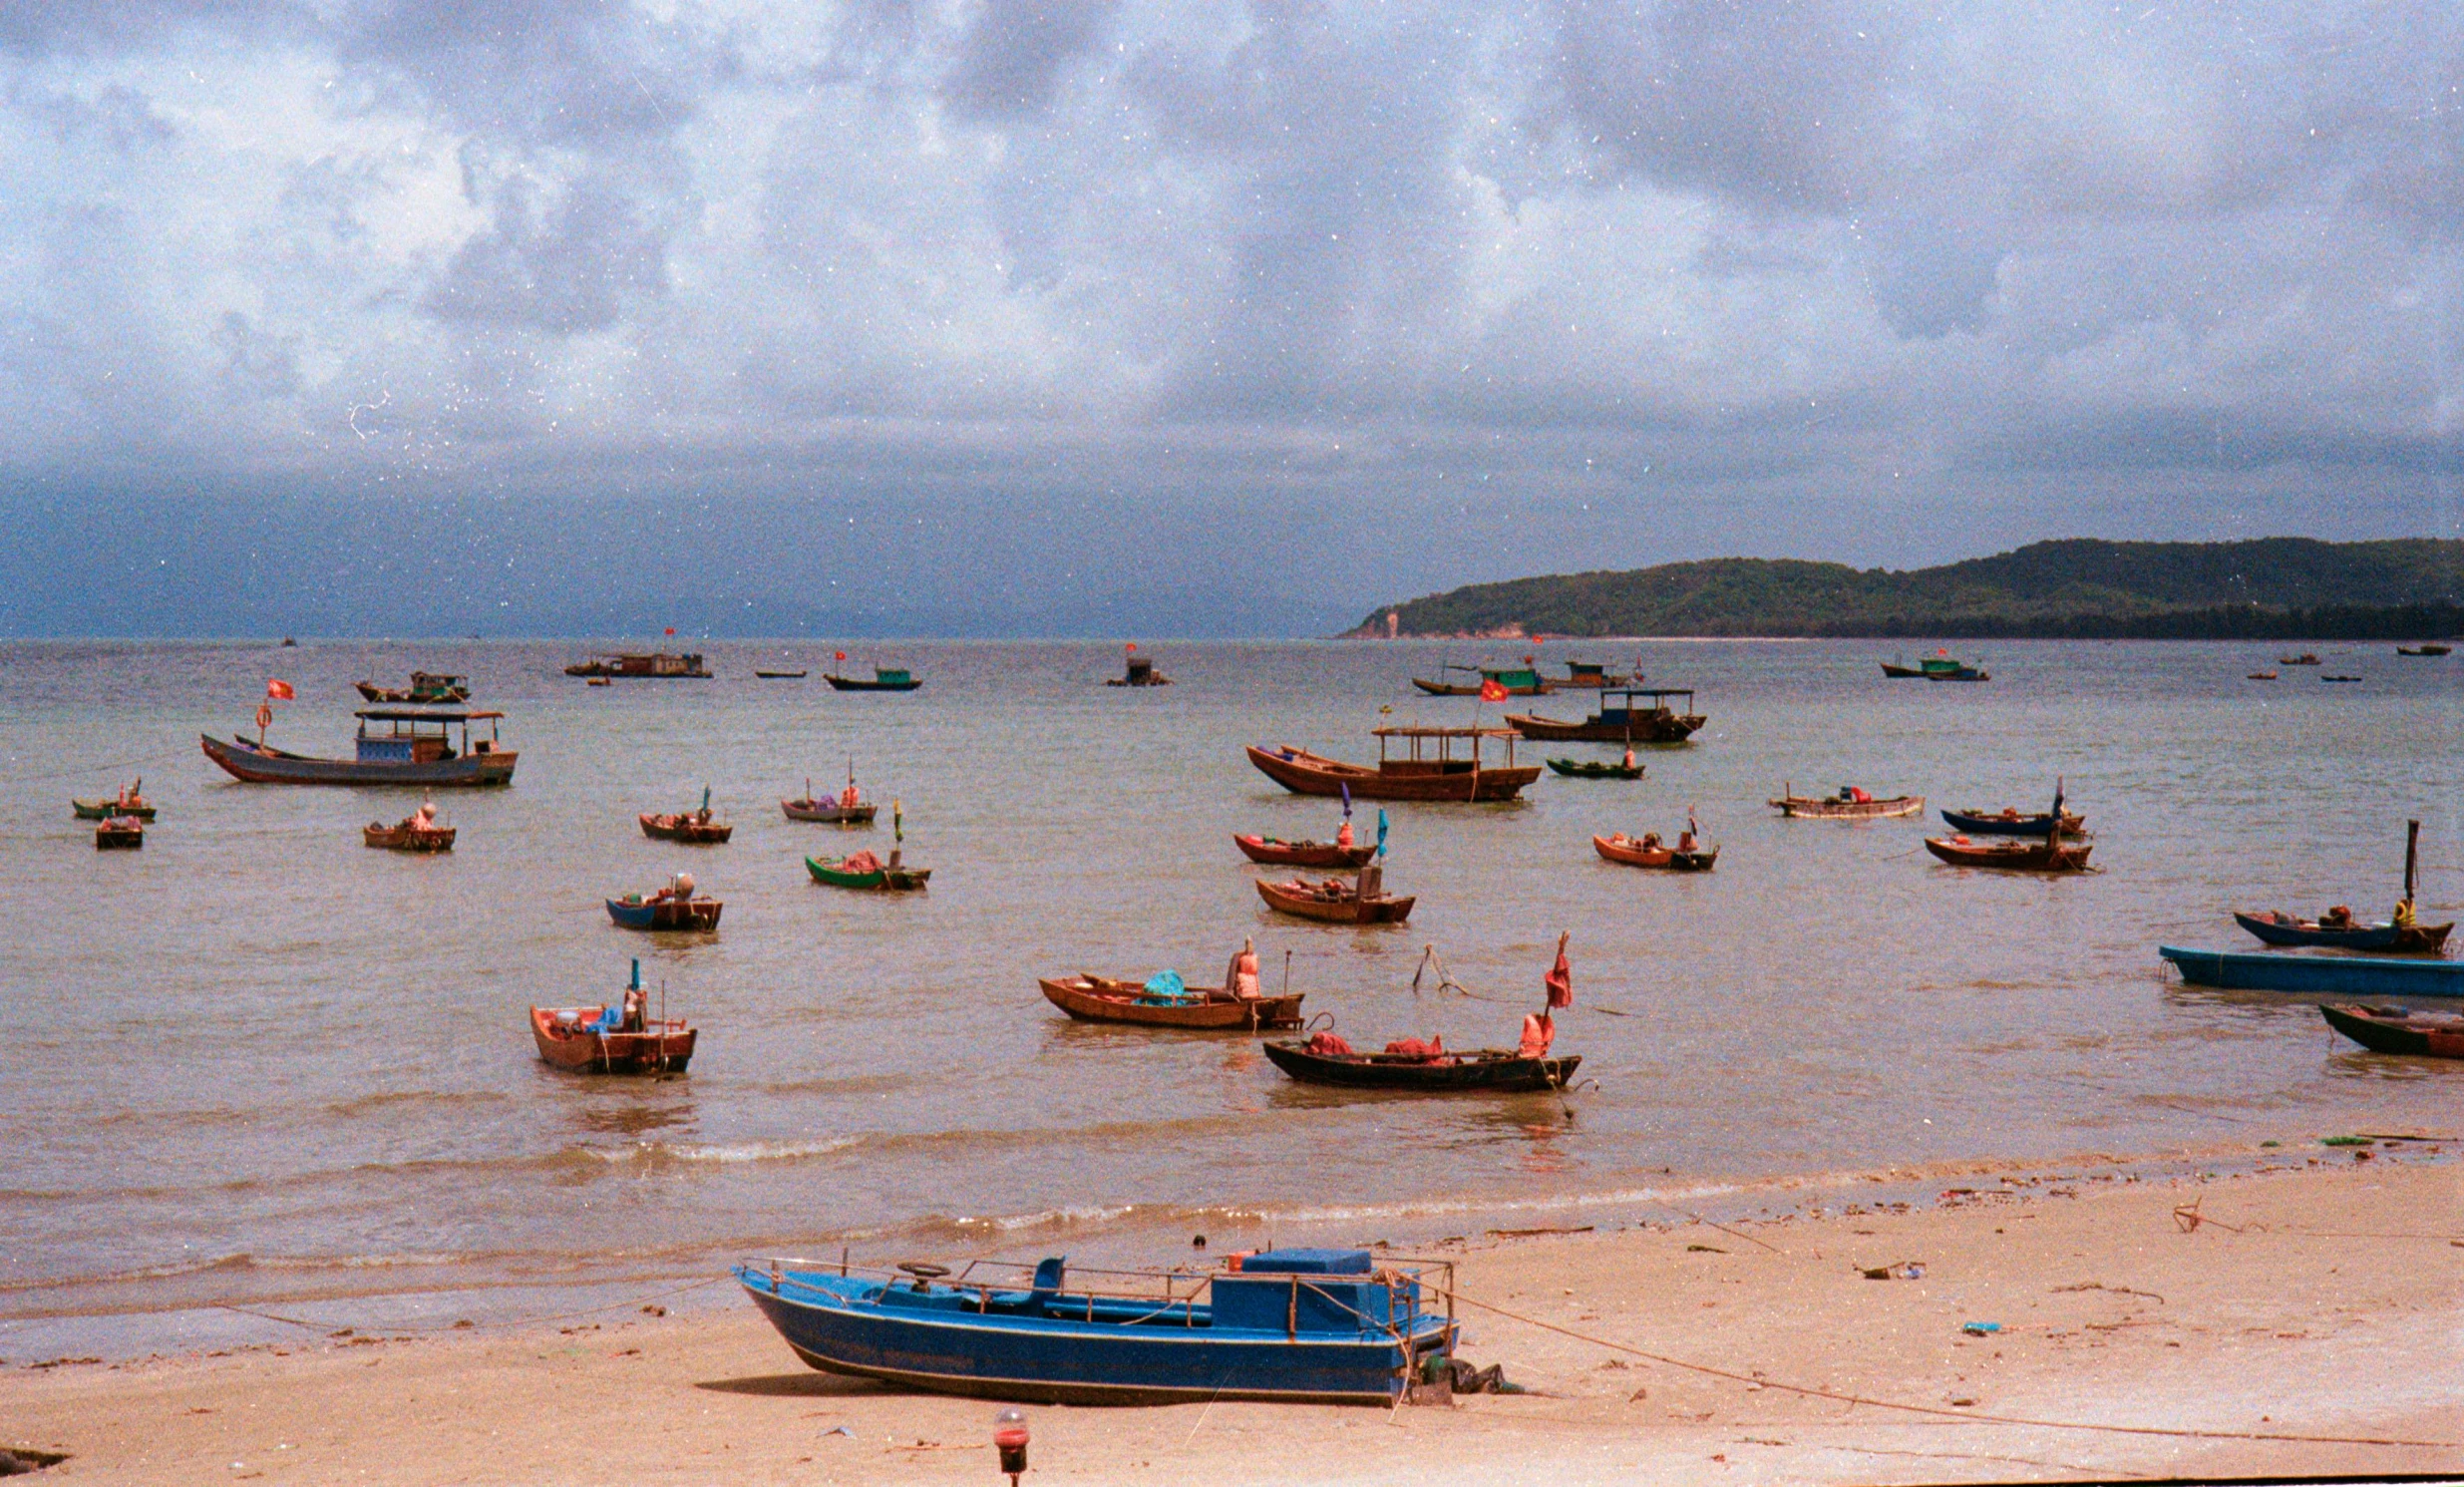 boats in the water on the beach with dark skies